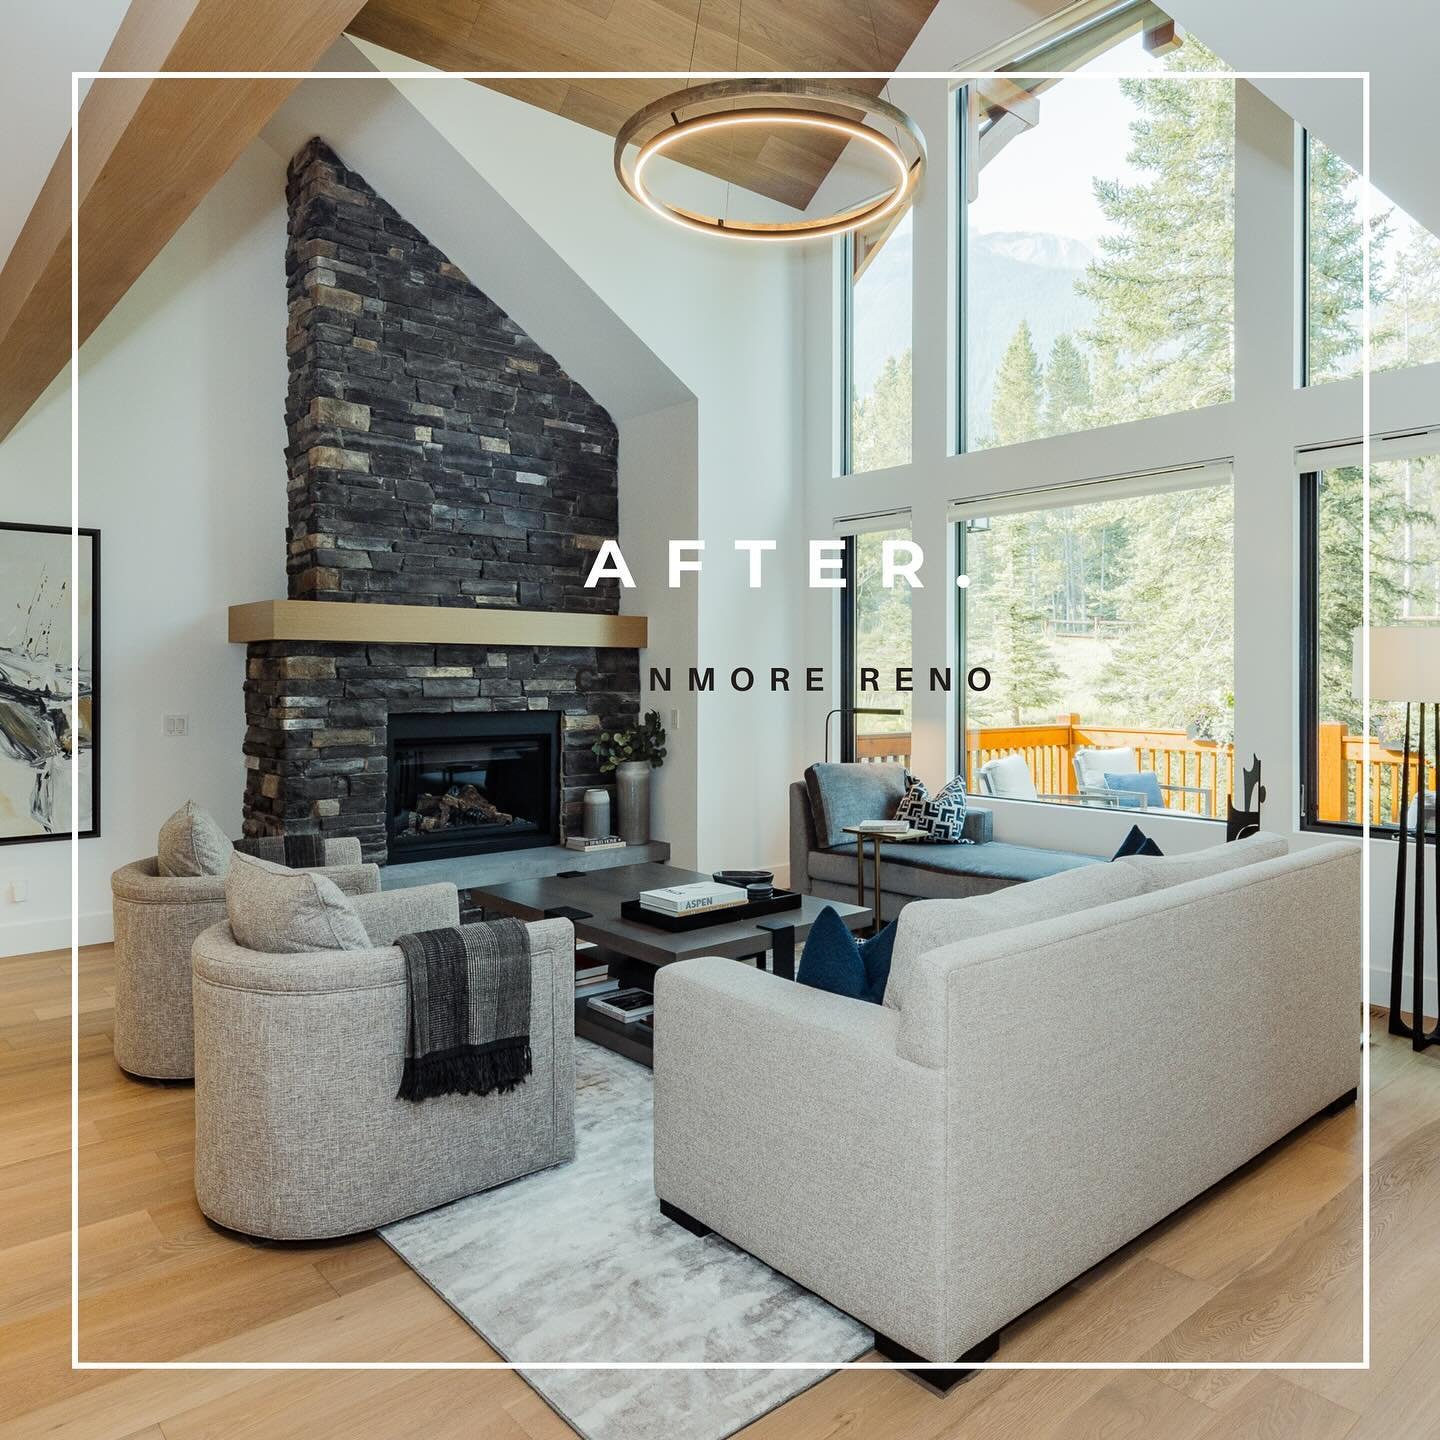 Our client loved the local Rundlestone fireplace but wanted a cool-toned, more contemporary aesthetic for the great room along with concealed window coverings. The wall was strapped-out to accommodate the retractable shades, paired with minimalist dr